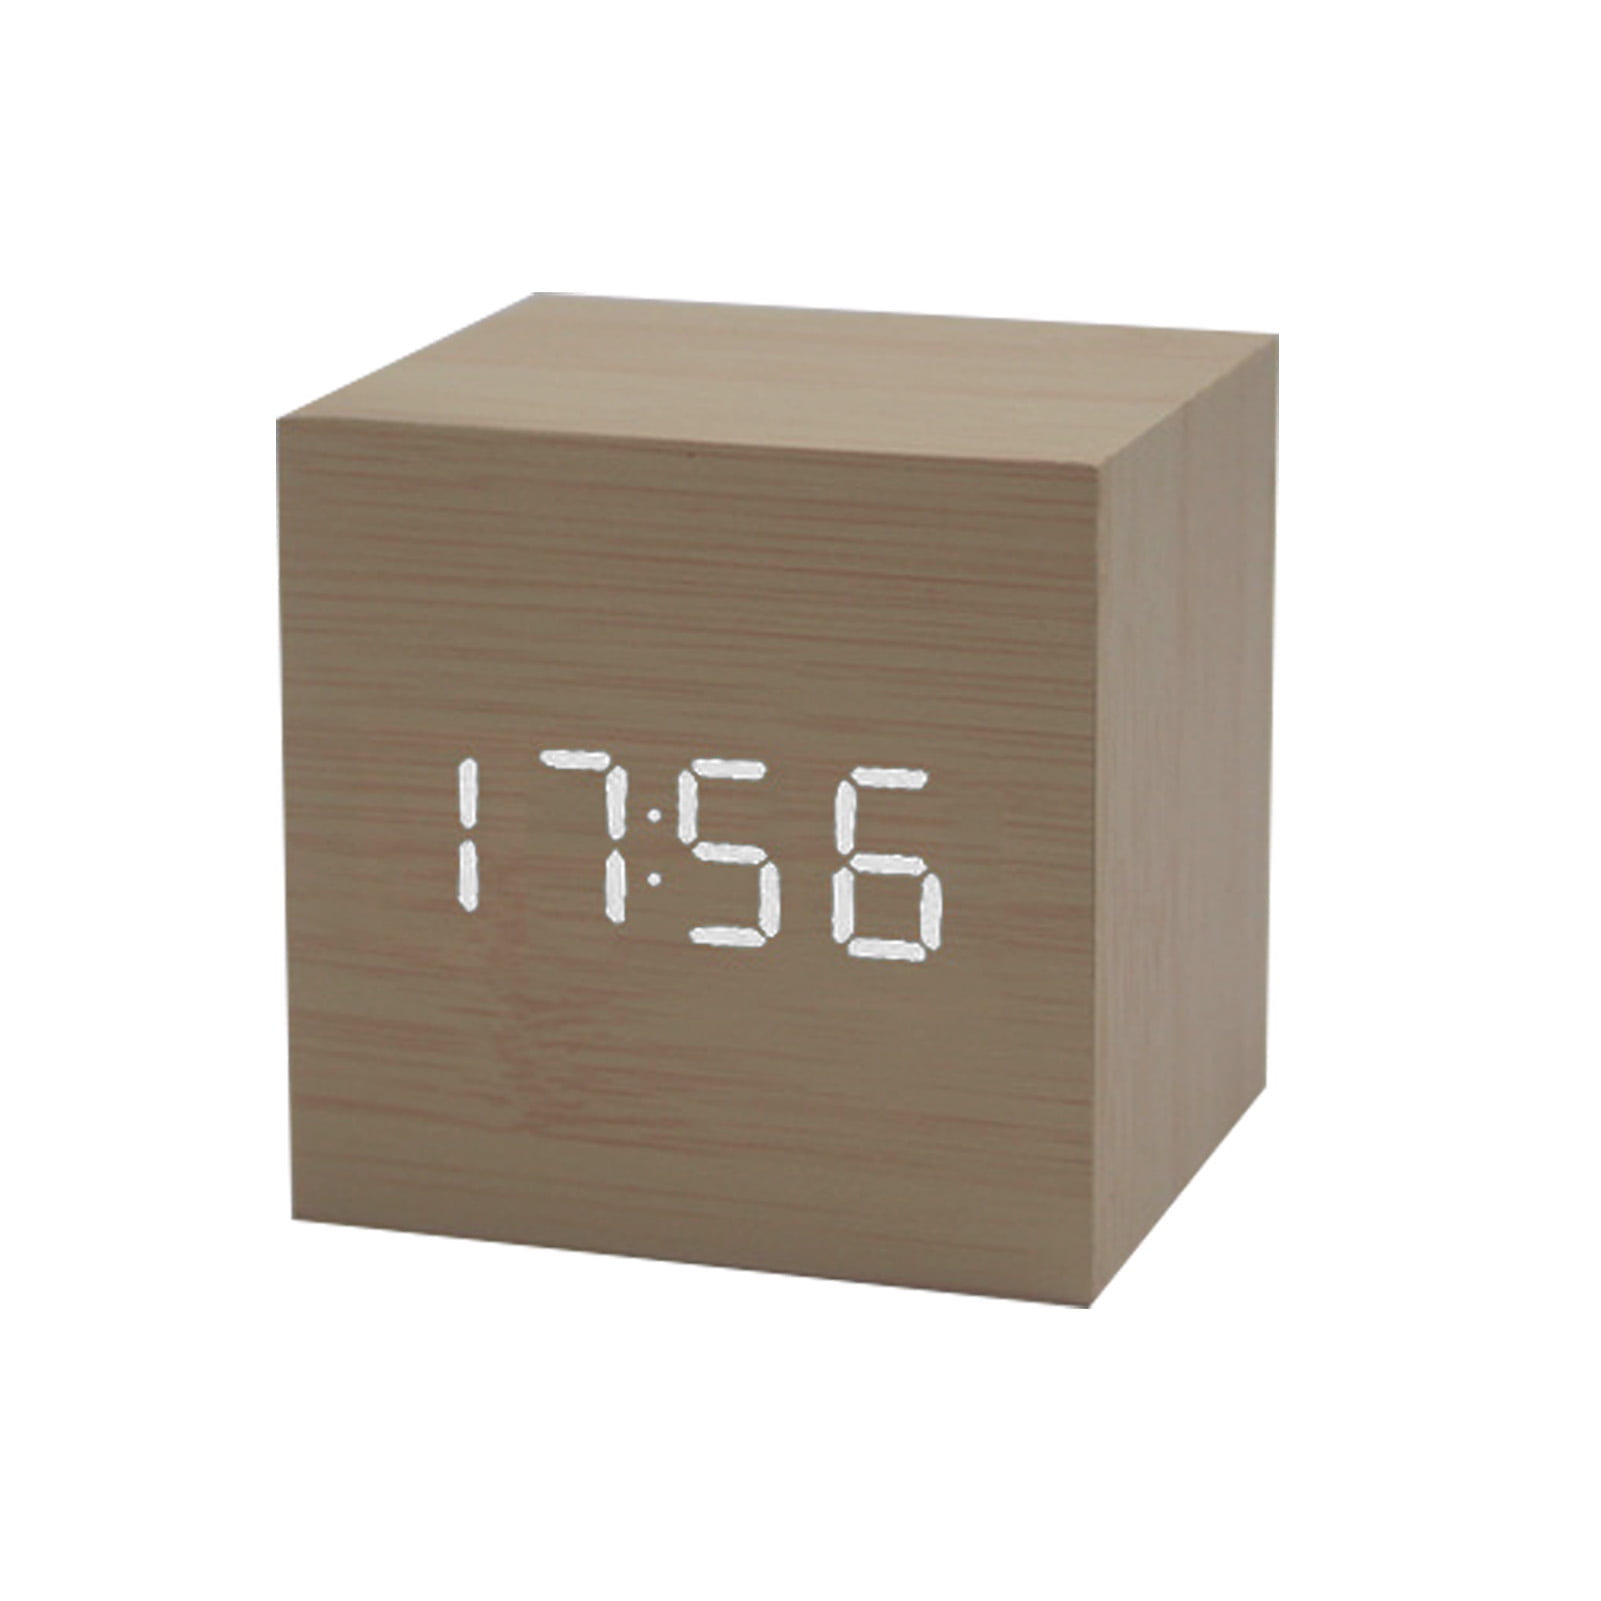 Modern Cube Wooden Wood Digital LED Desk Voice Control Alarm Clock Thermometer 